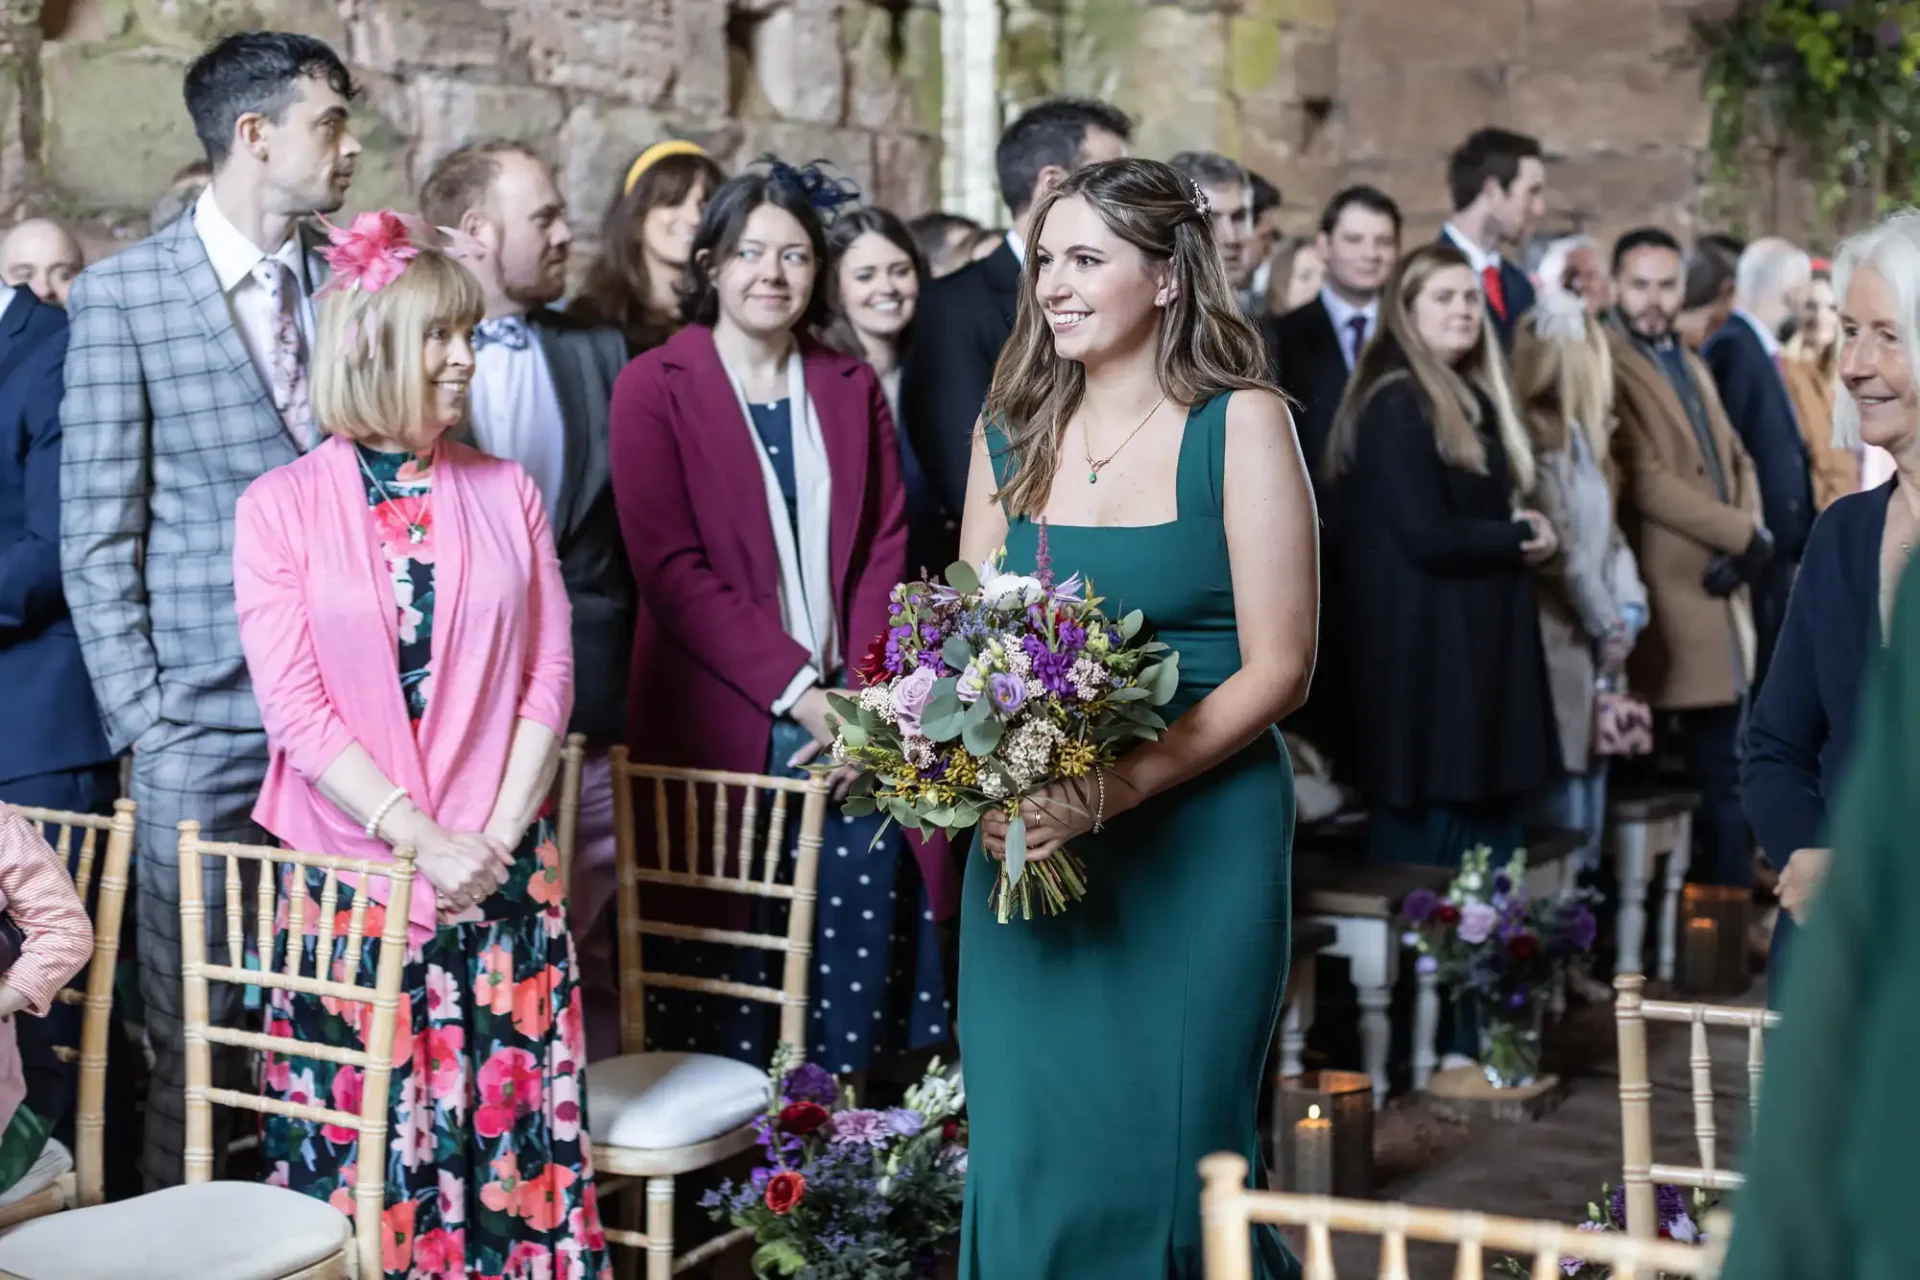 A woman in a green dress holds a bouquet while walking down an aisle at a wedding ceremony, with guests standing and seated nearby.